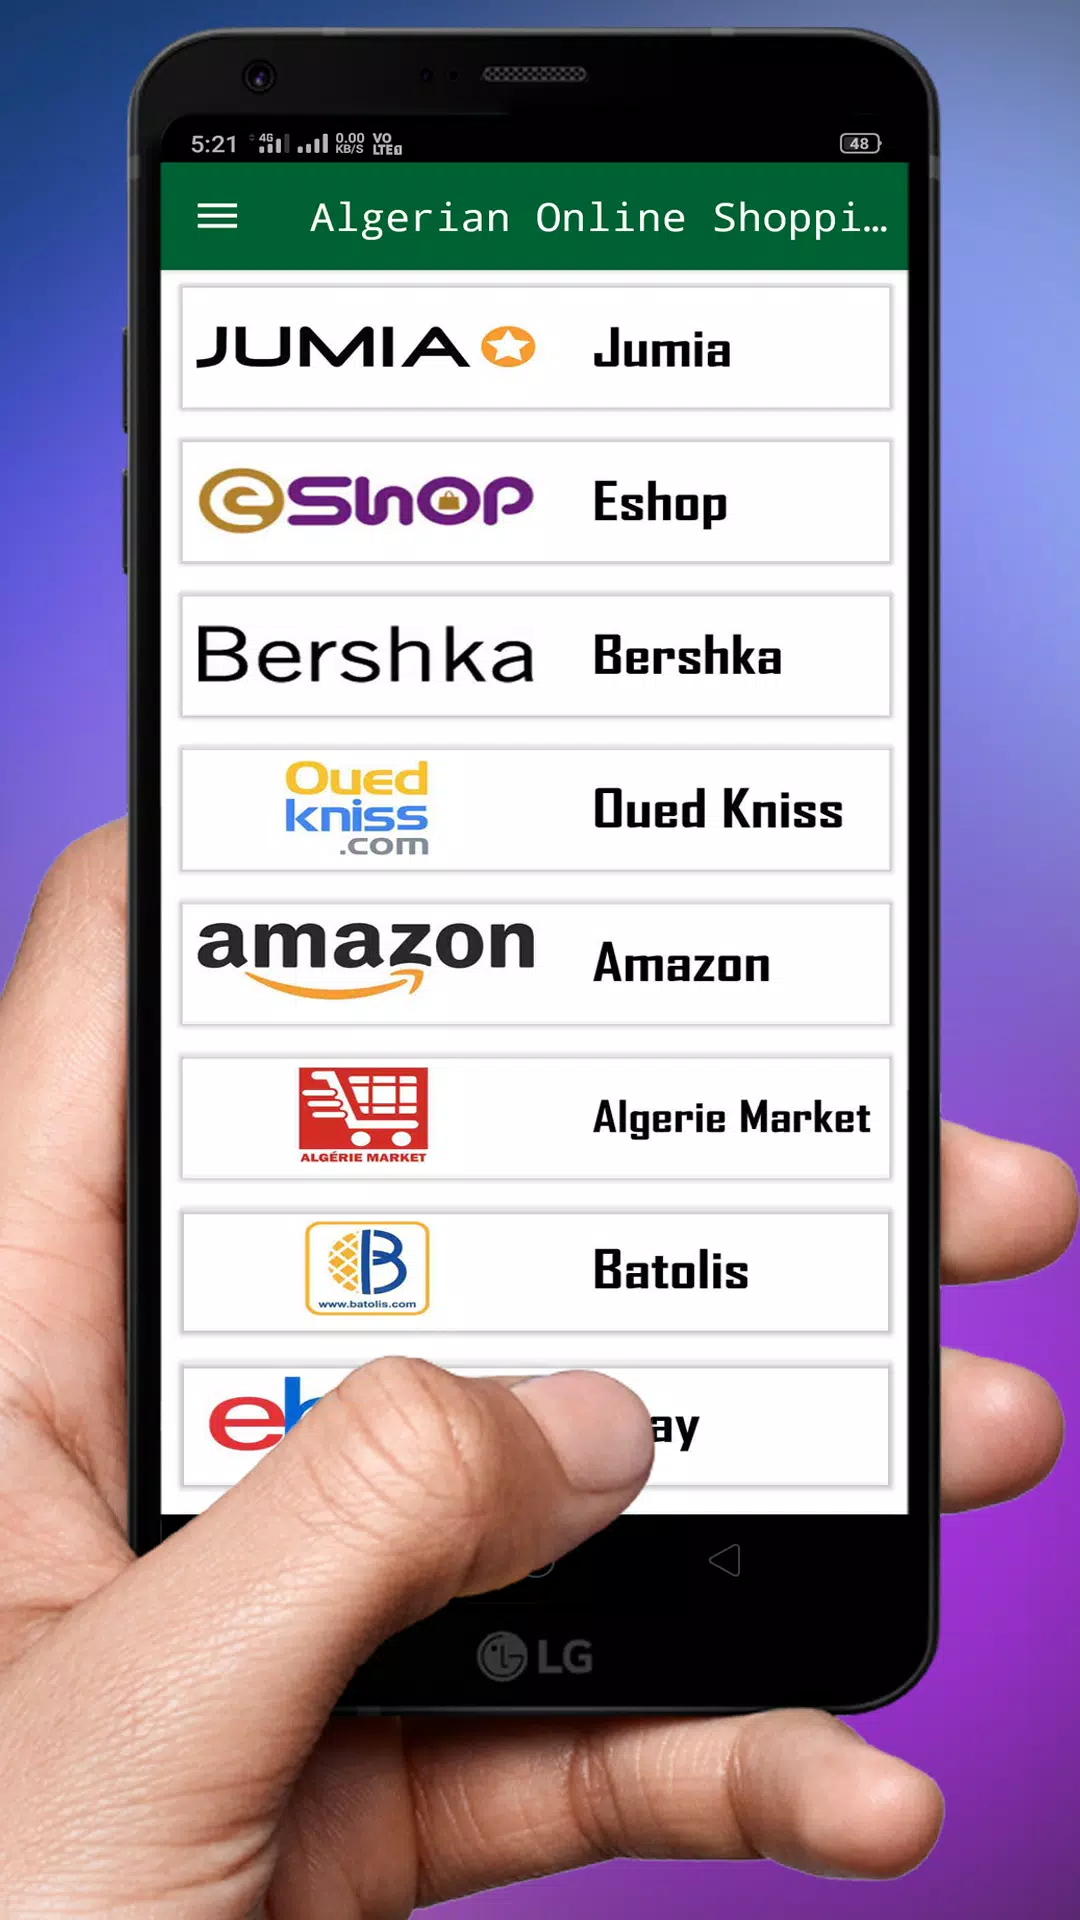 Algerian Online Shopping for Android - APK Download